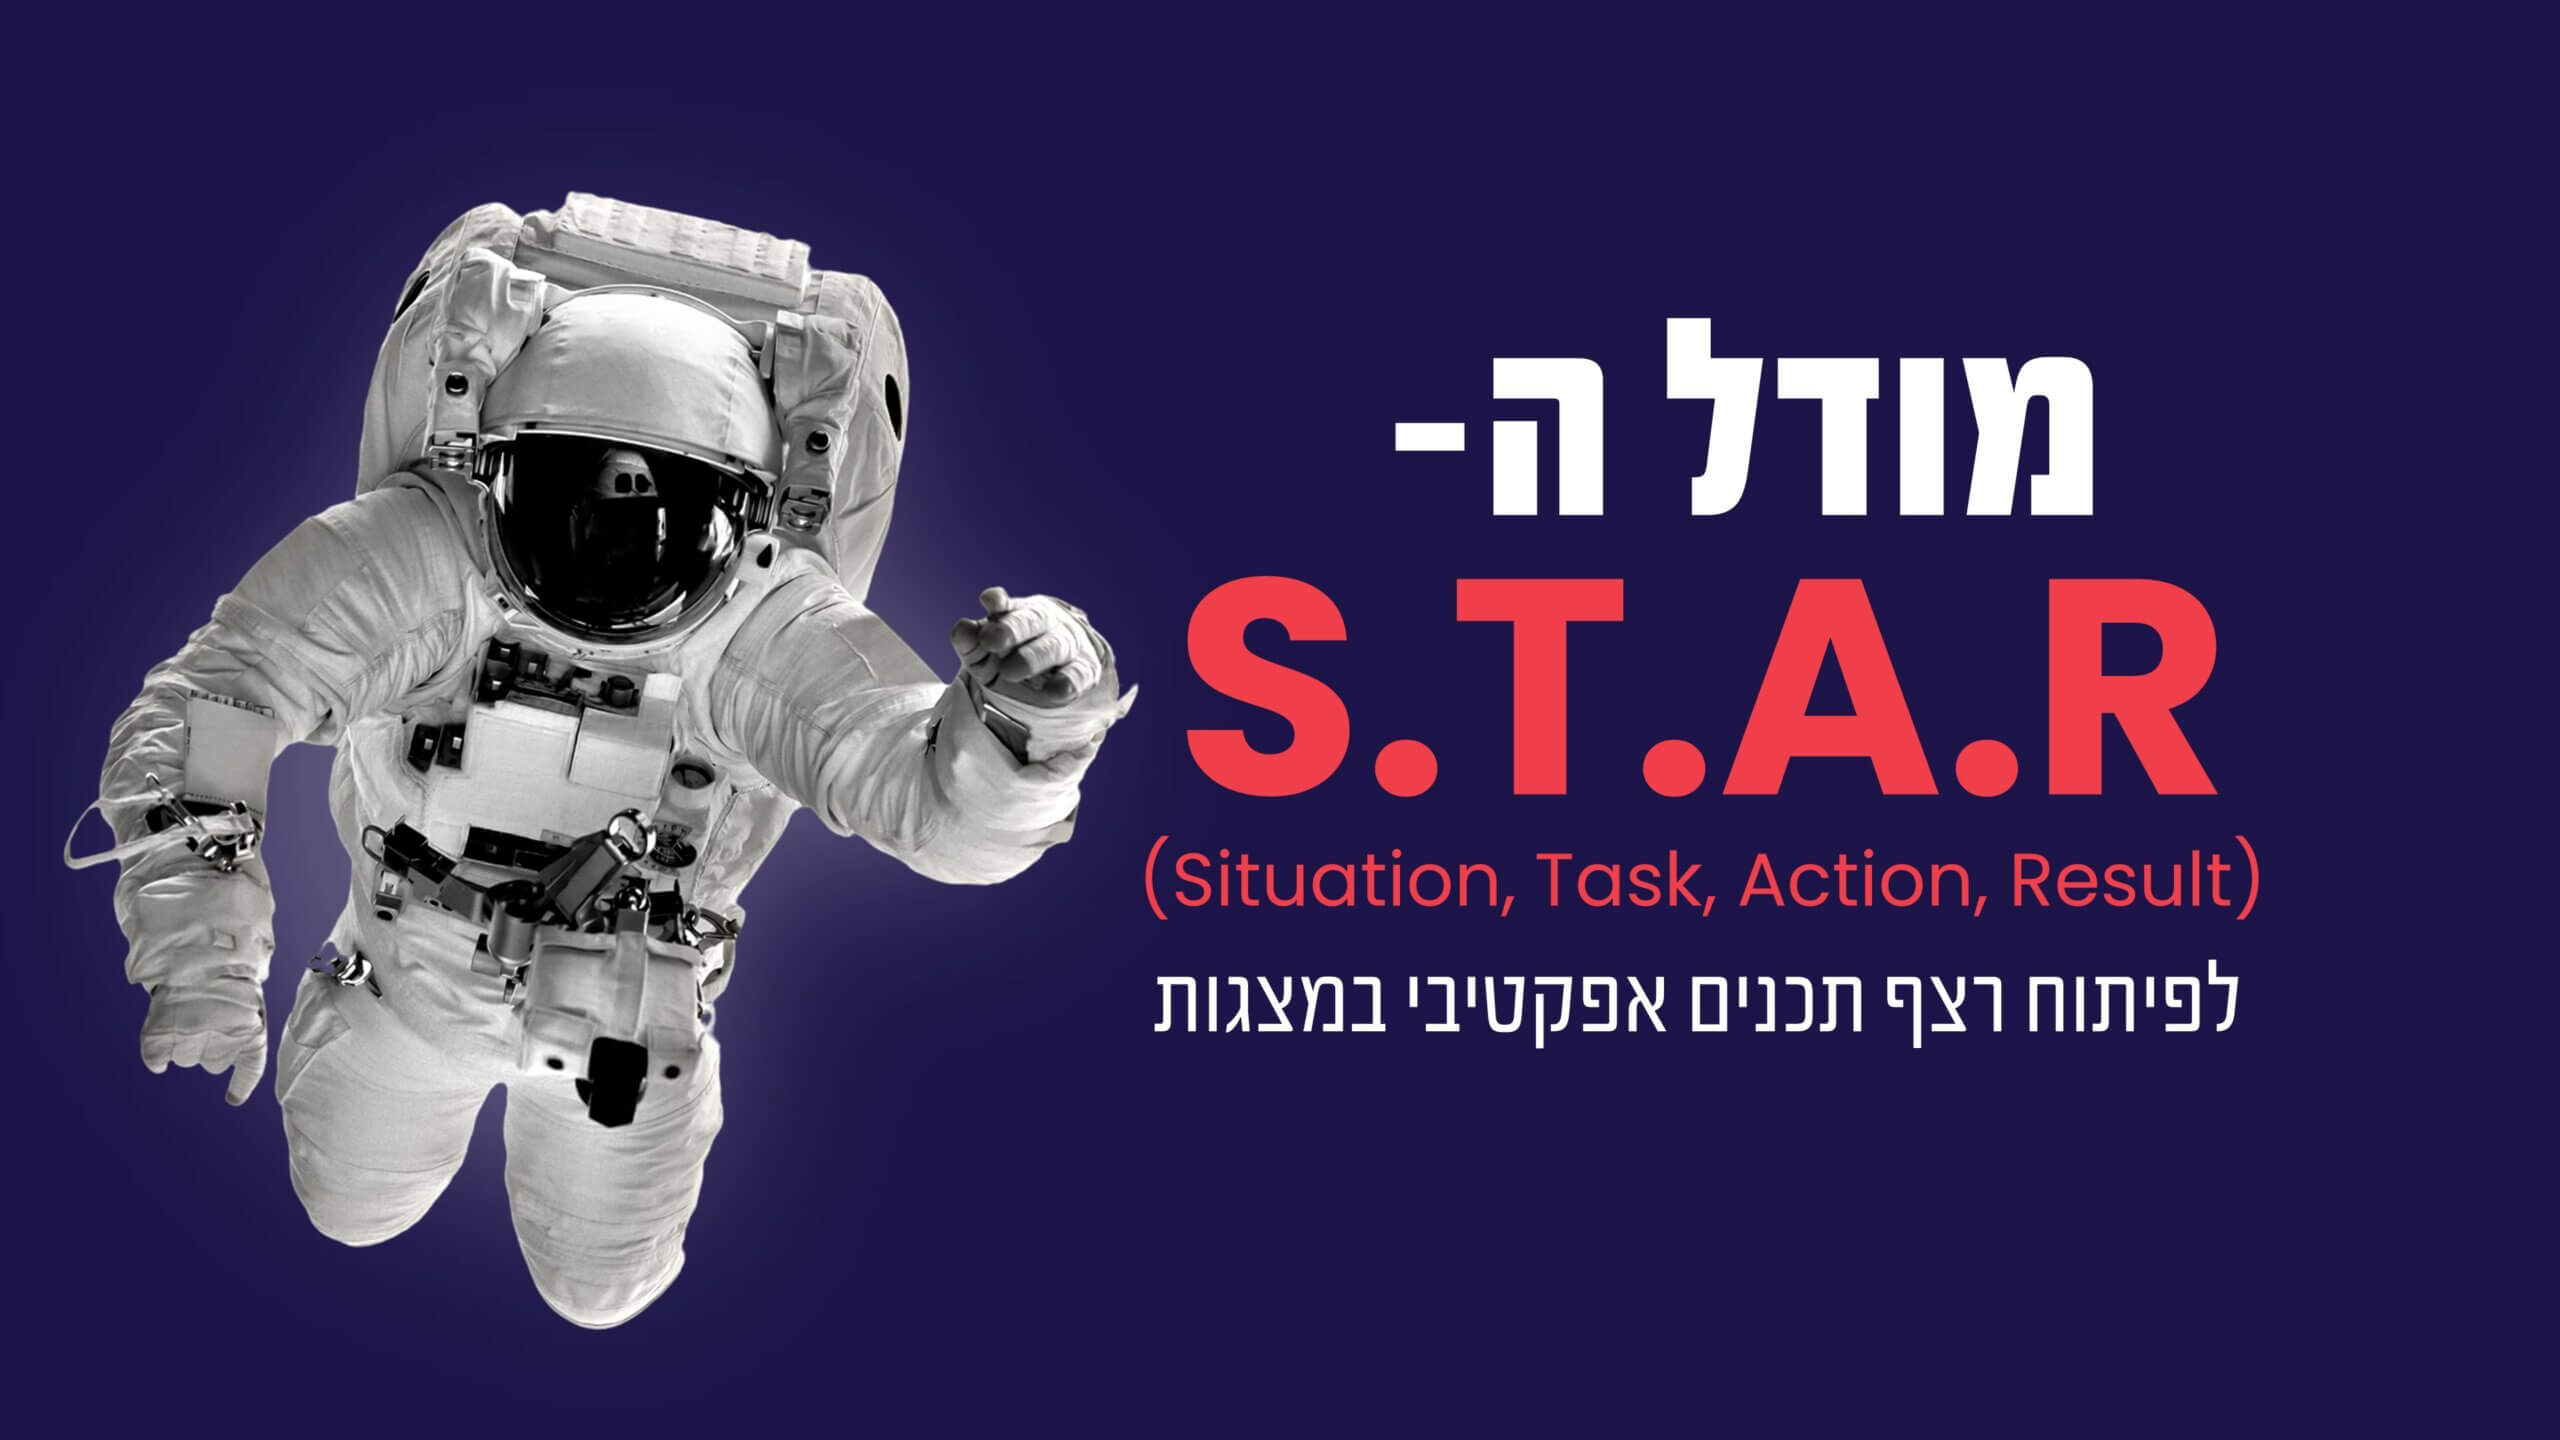 Read more about the article מודל S.T.A.R (Situation, Task, Action, Result) לפיתוח רצף תכנים אפקטיבי במצגות.